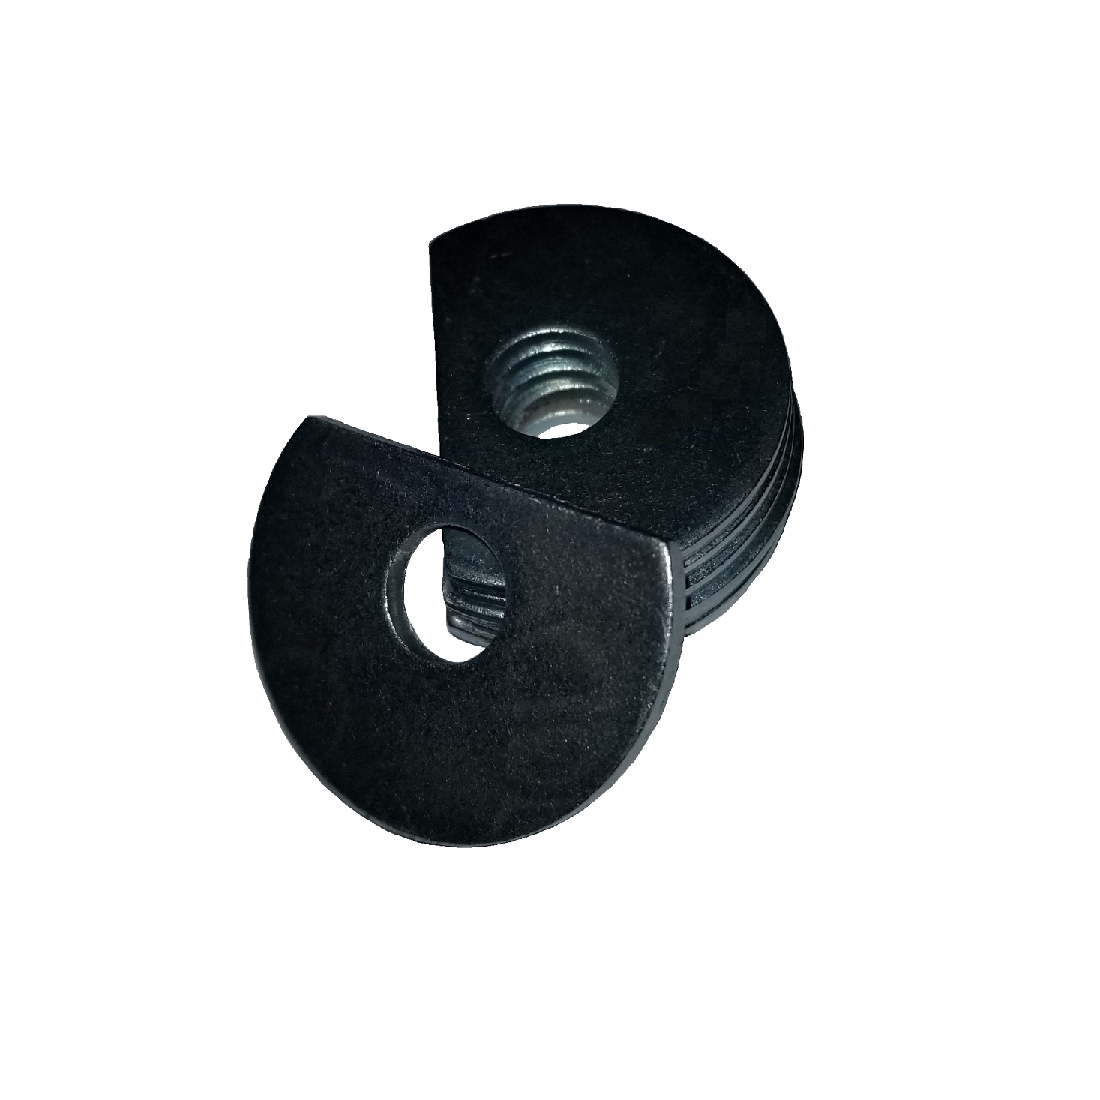 Clipped OD Washer - 1.031 ID, 2.750 OD, 0.125 Thick, Aluminum